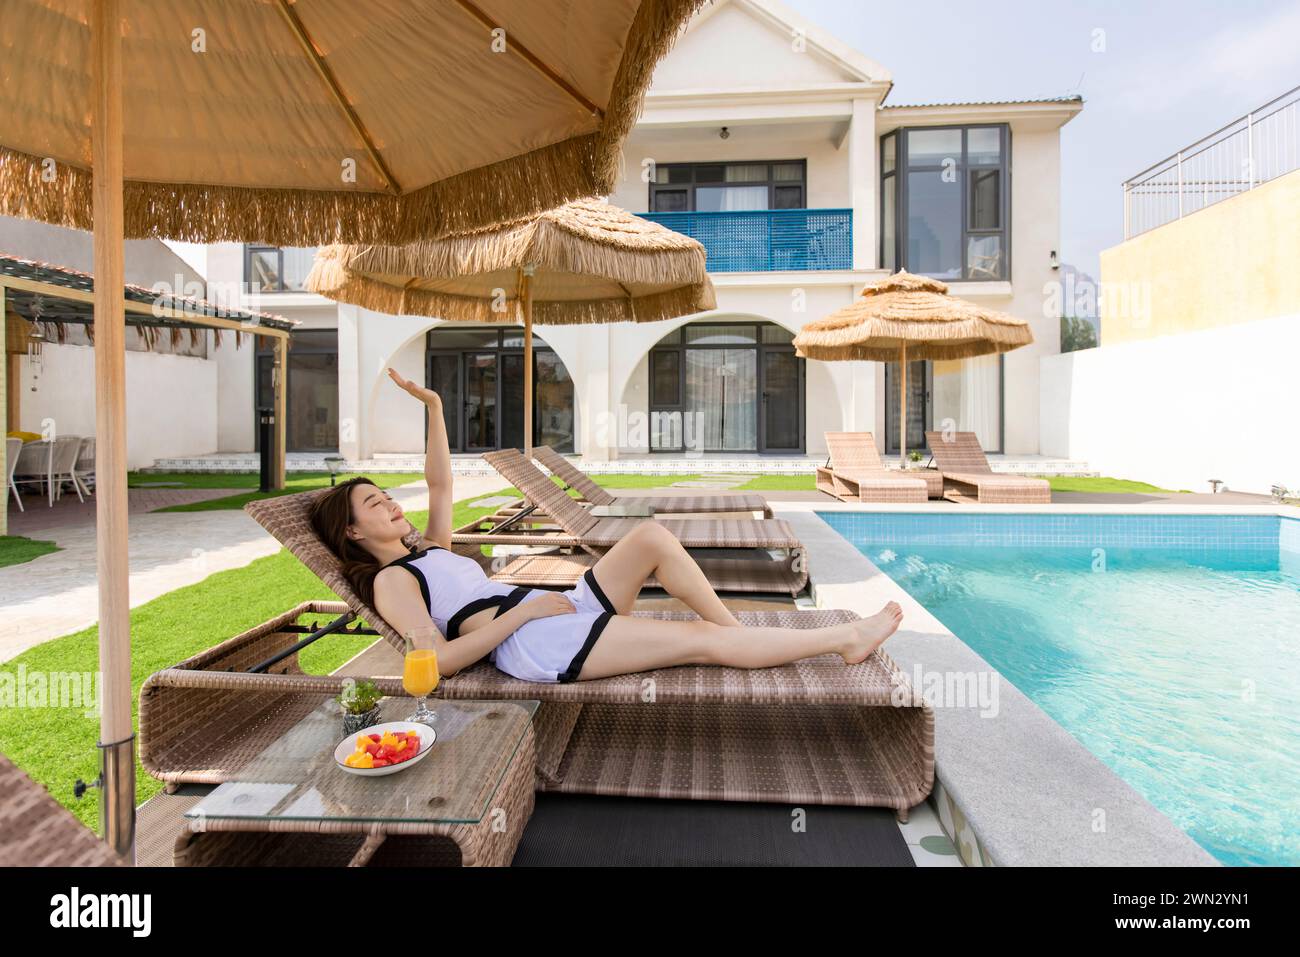 Young woman taking a rest on sun lounger Stock Photo